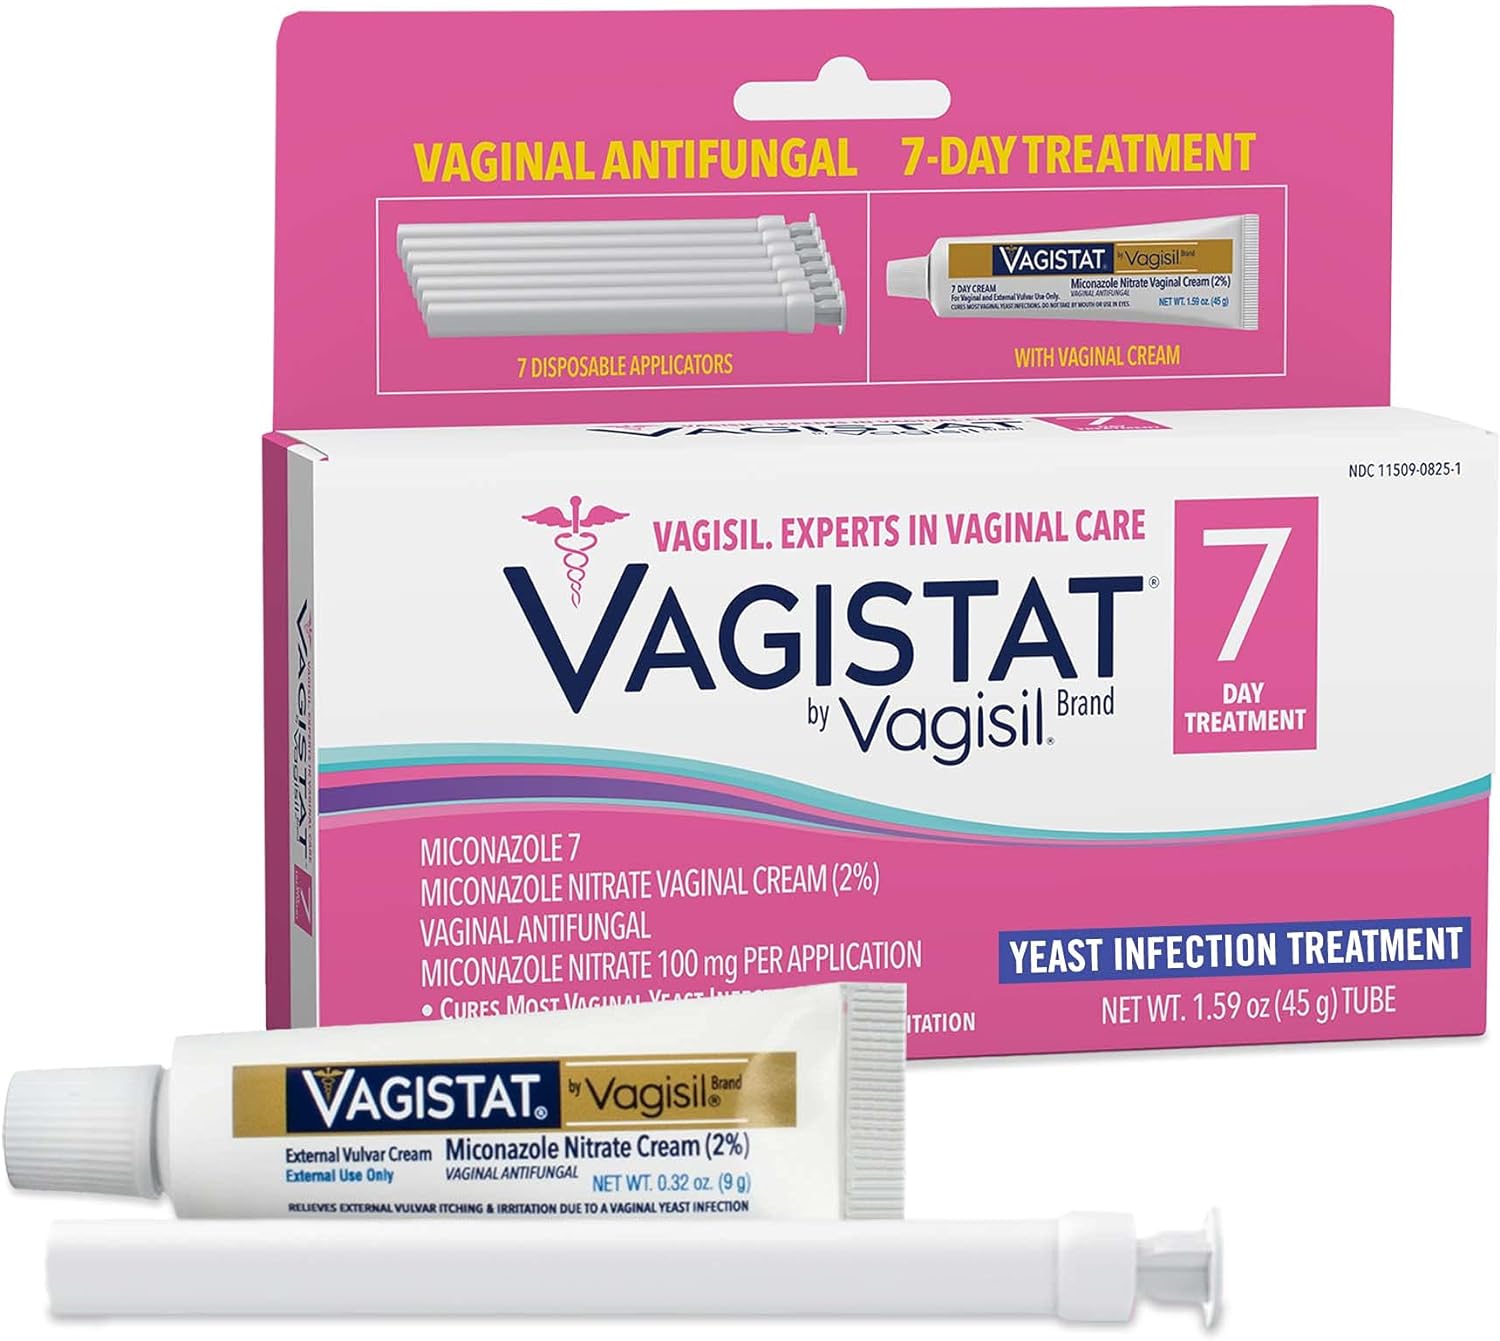 Vagistat 7 Day Yeast Infection Treatment for Women, Helps Relieve External Itching and Irritation, Contains 2% External Miconazole Nitrate Cream & 7 Disposable Applicators, by Vagisil (Pack of 1)